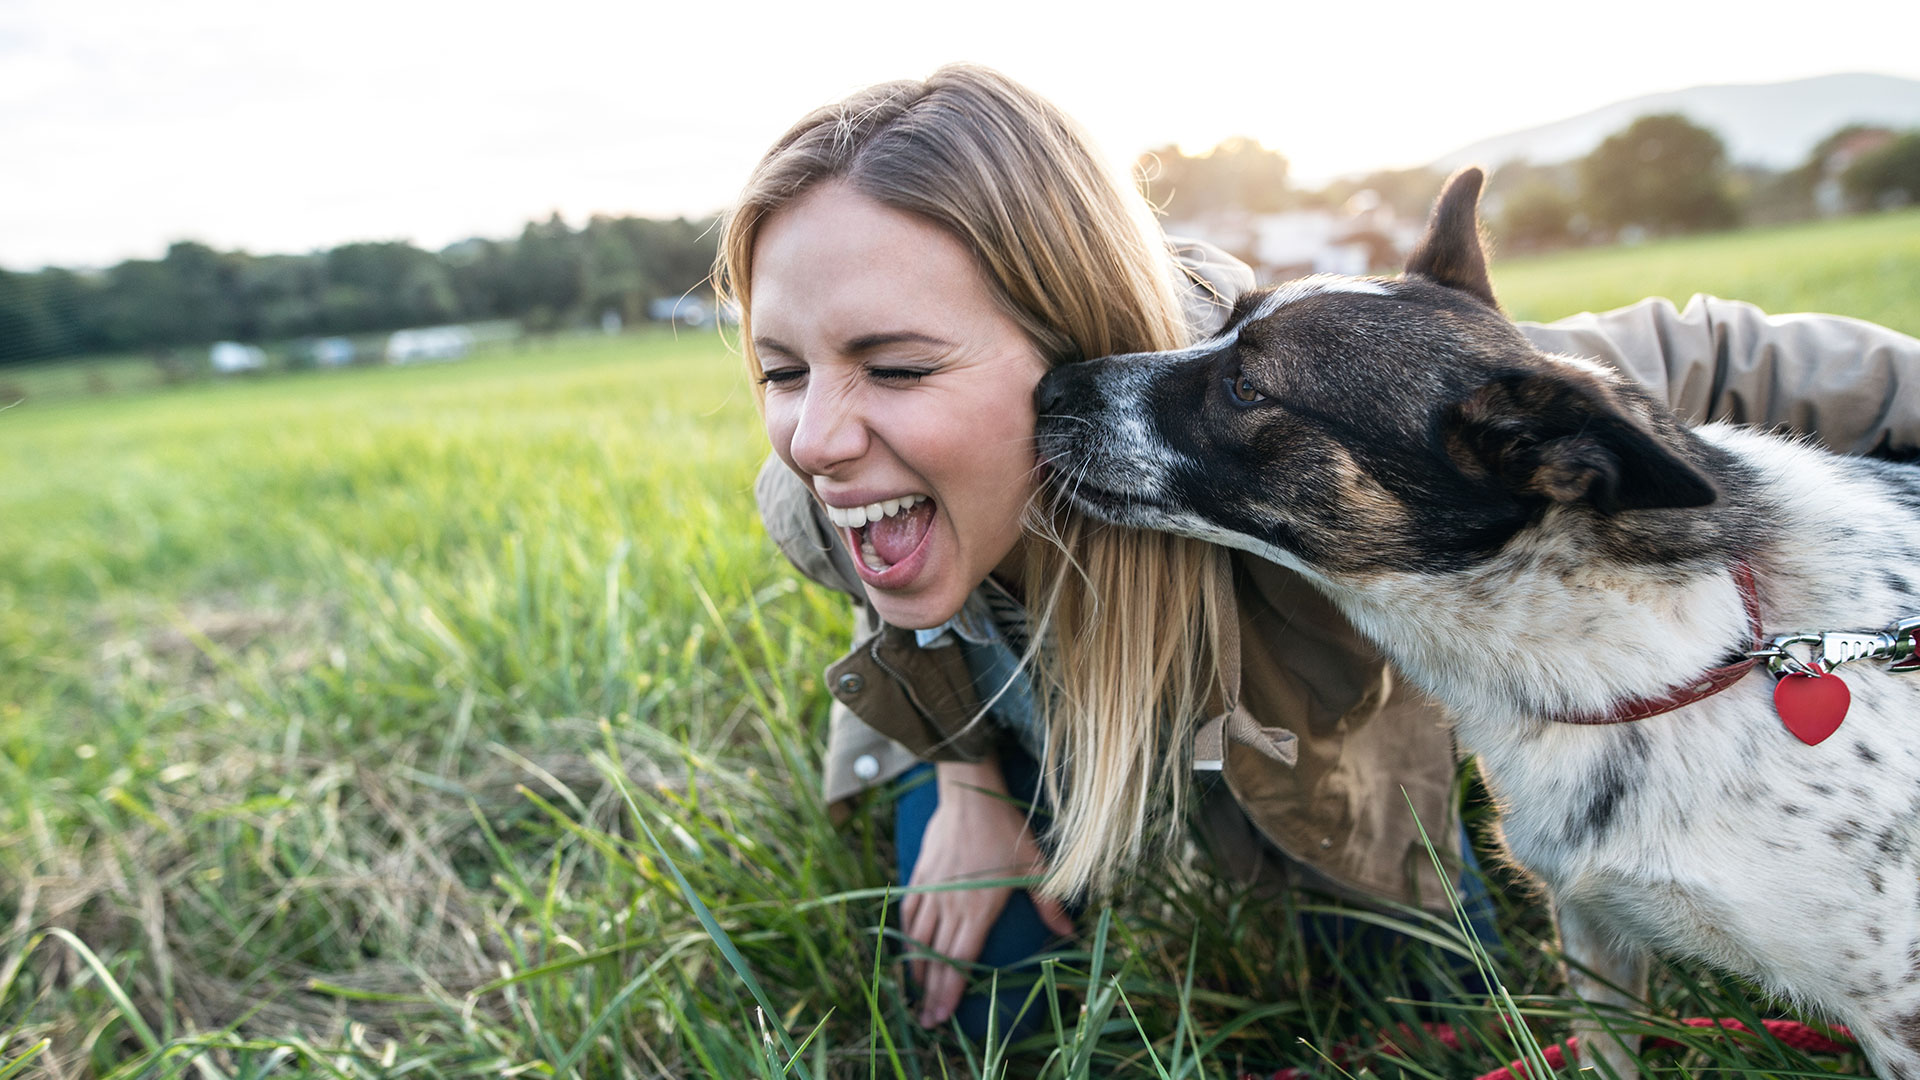 A woman gets smooches from her dog in a grassy field.